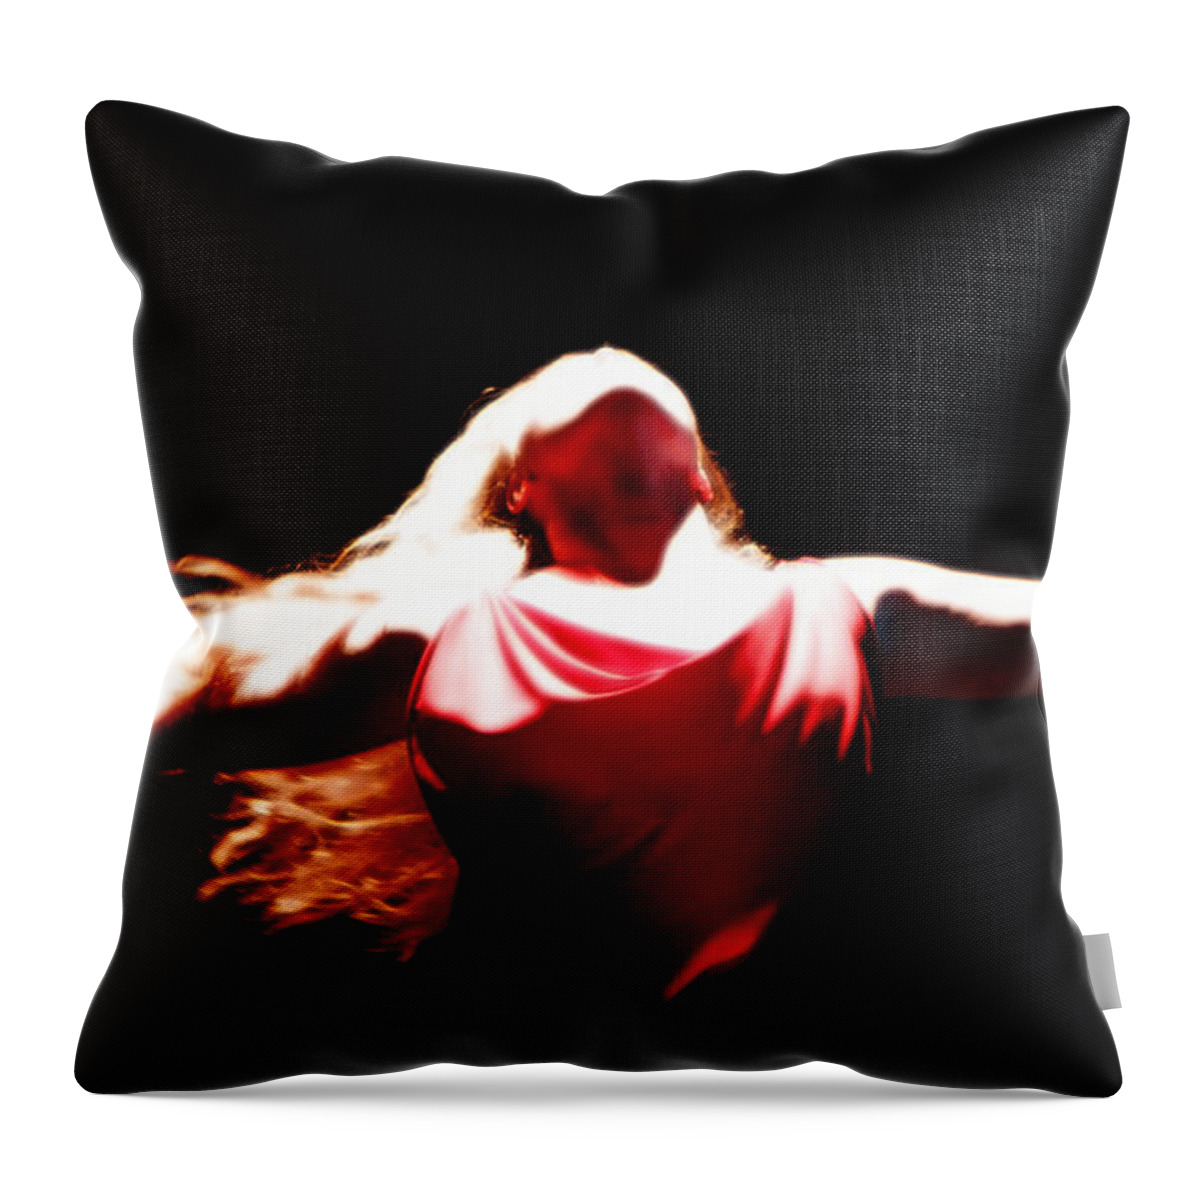 Kg Throw Pillow featuring the photograph Freedom by KG Thienemann